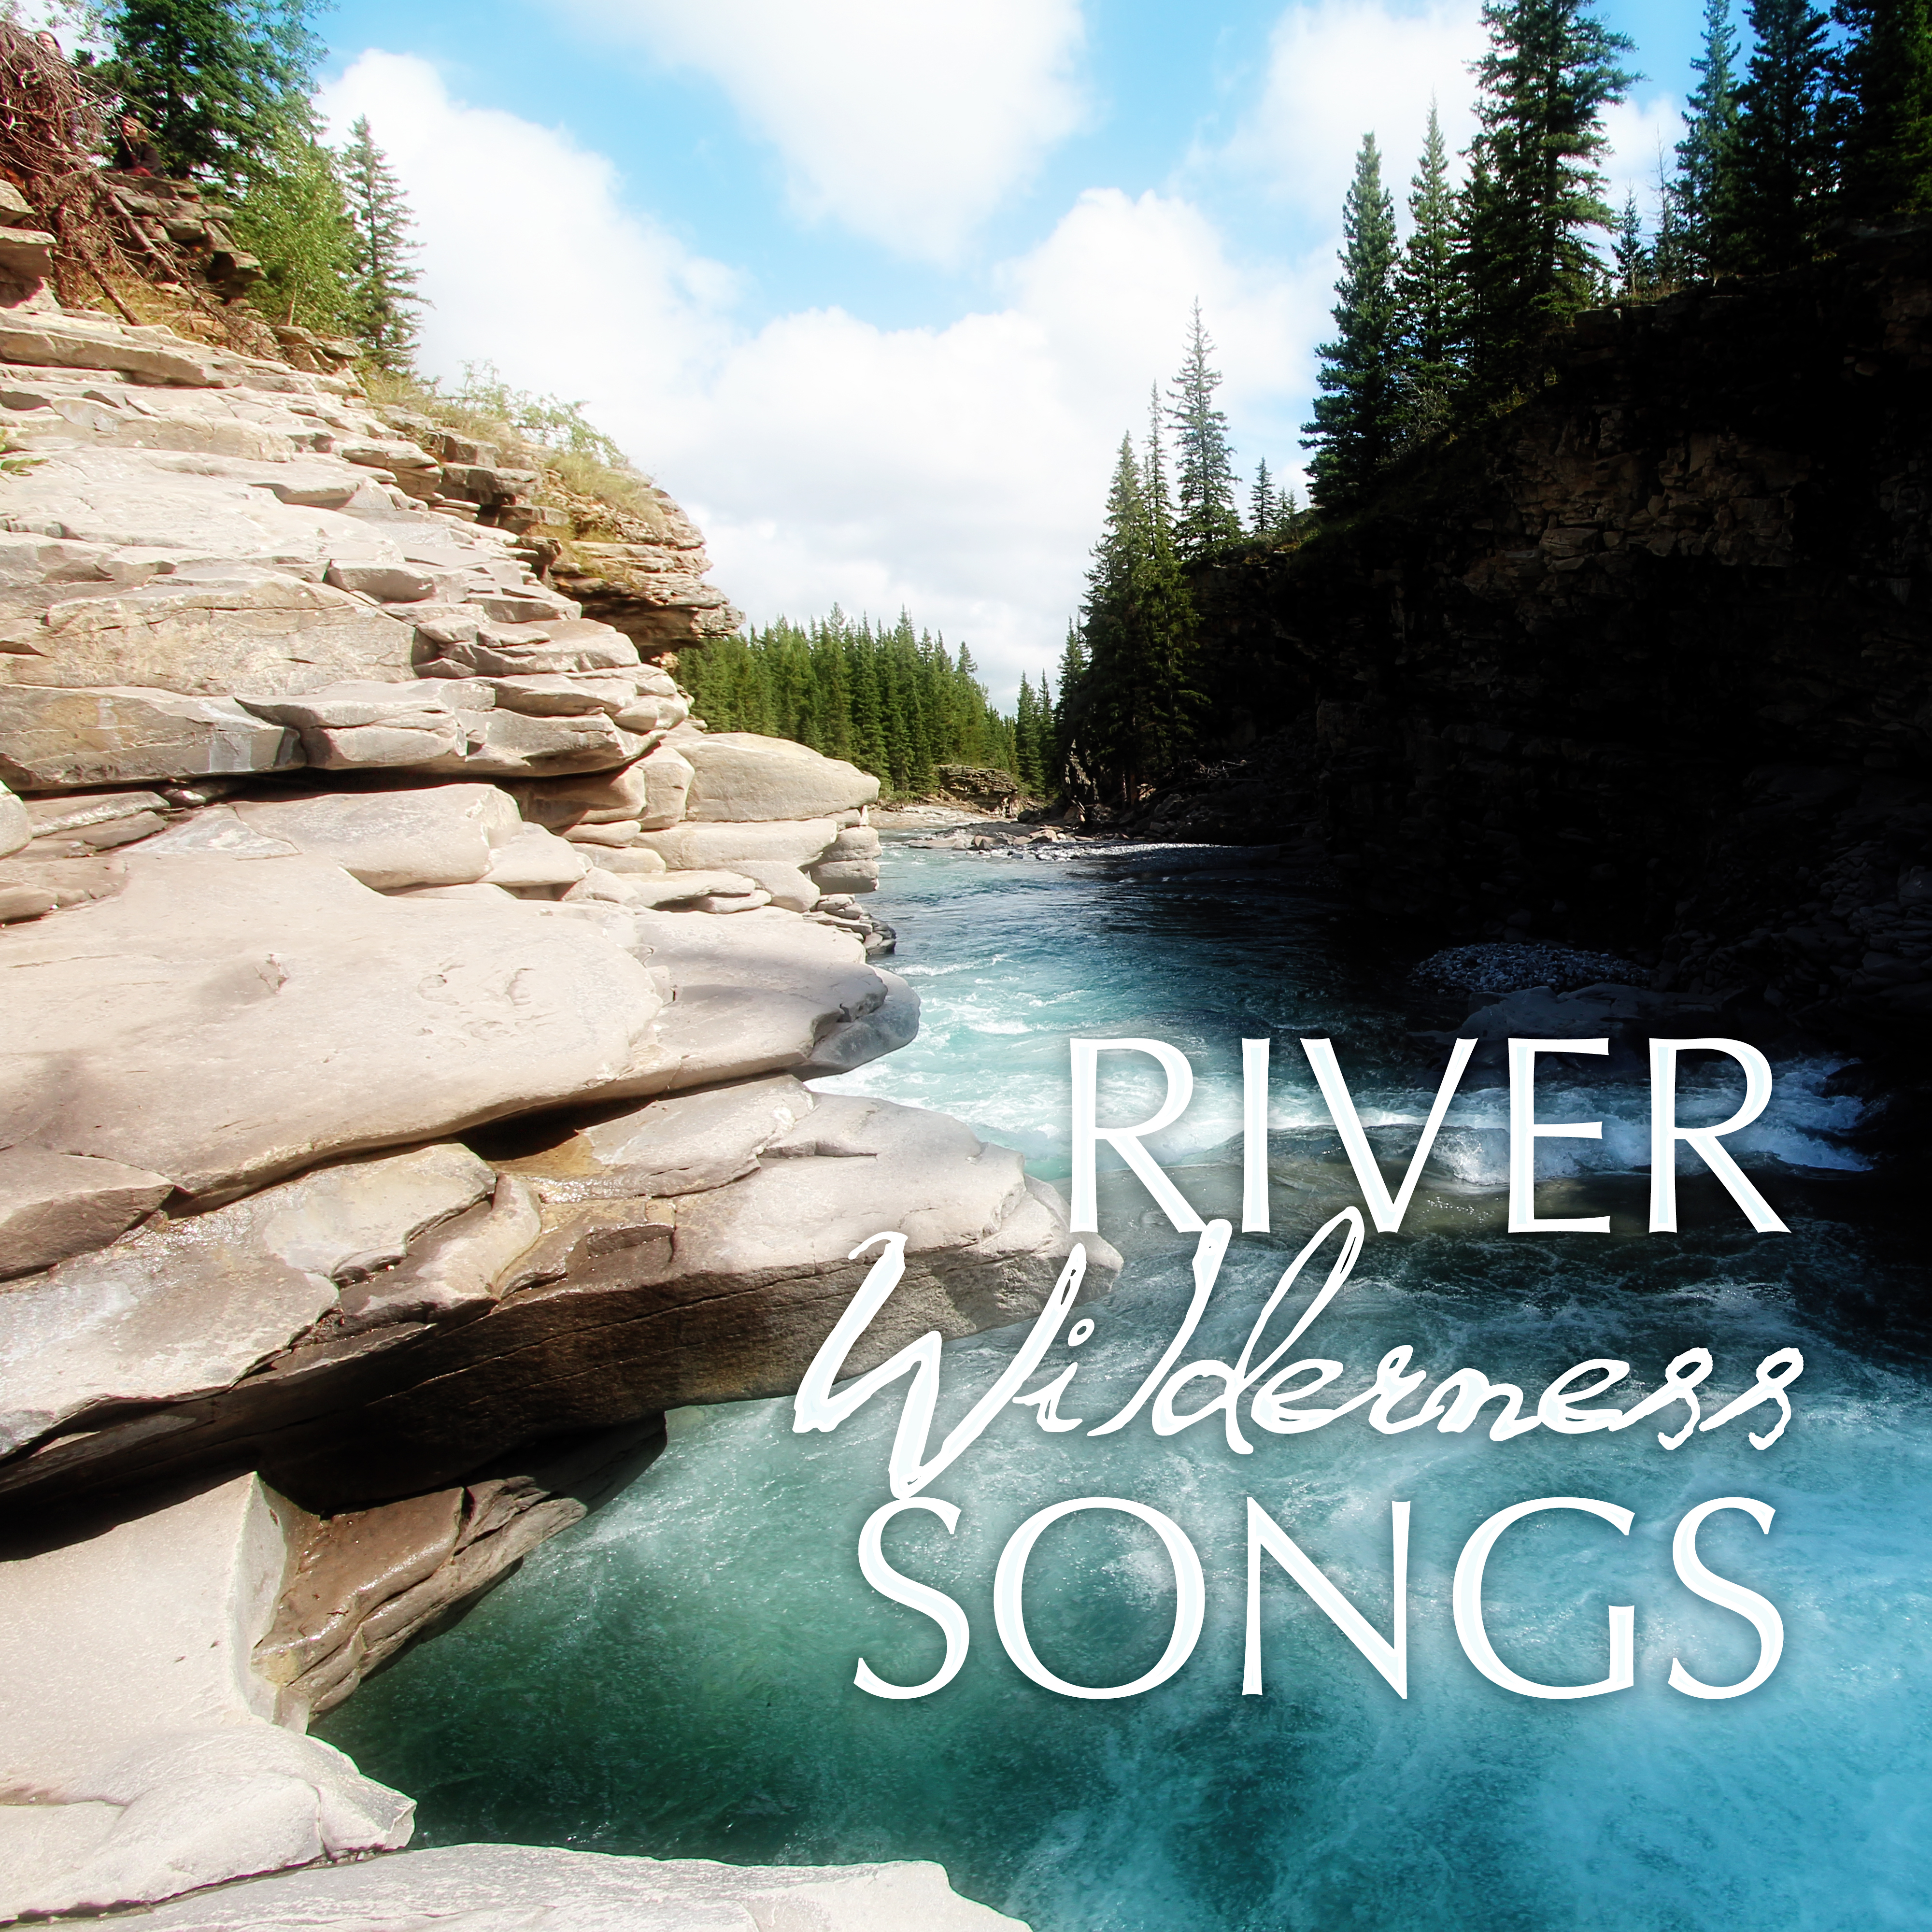 River Wilderness Songs – Healing Soothing Nature Sounds to Relax, Chakra, Massage, Meditation, Sleep, Spa, Reiki, Yoga